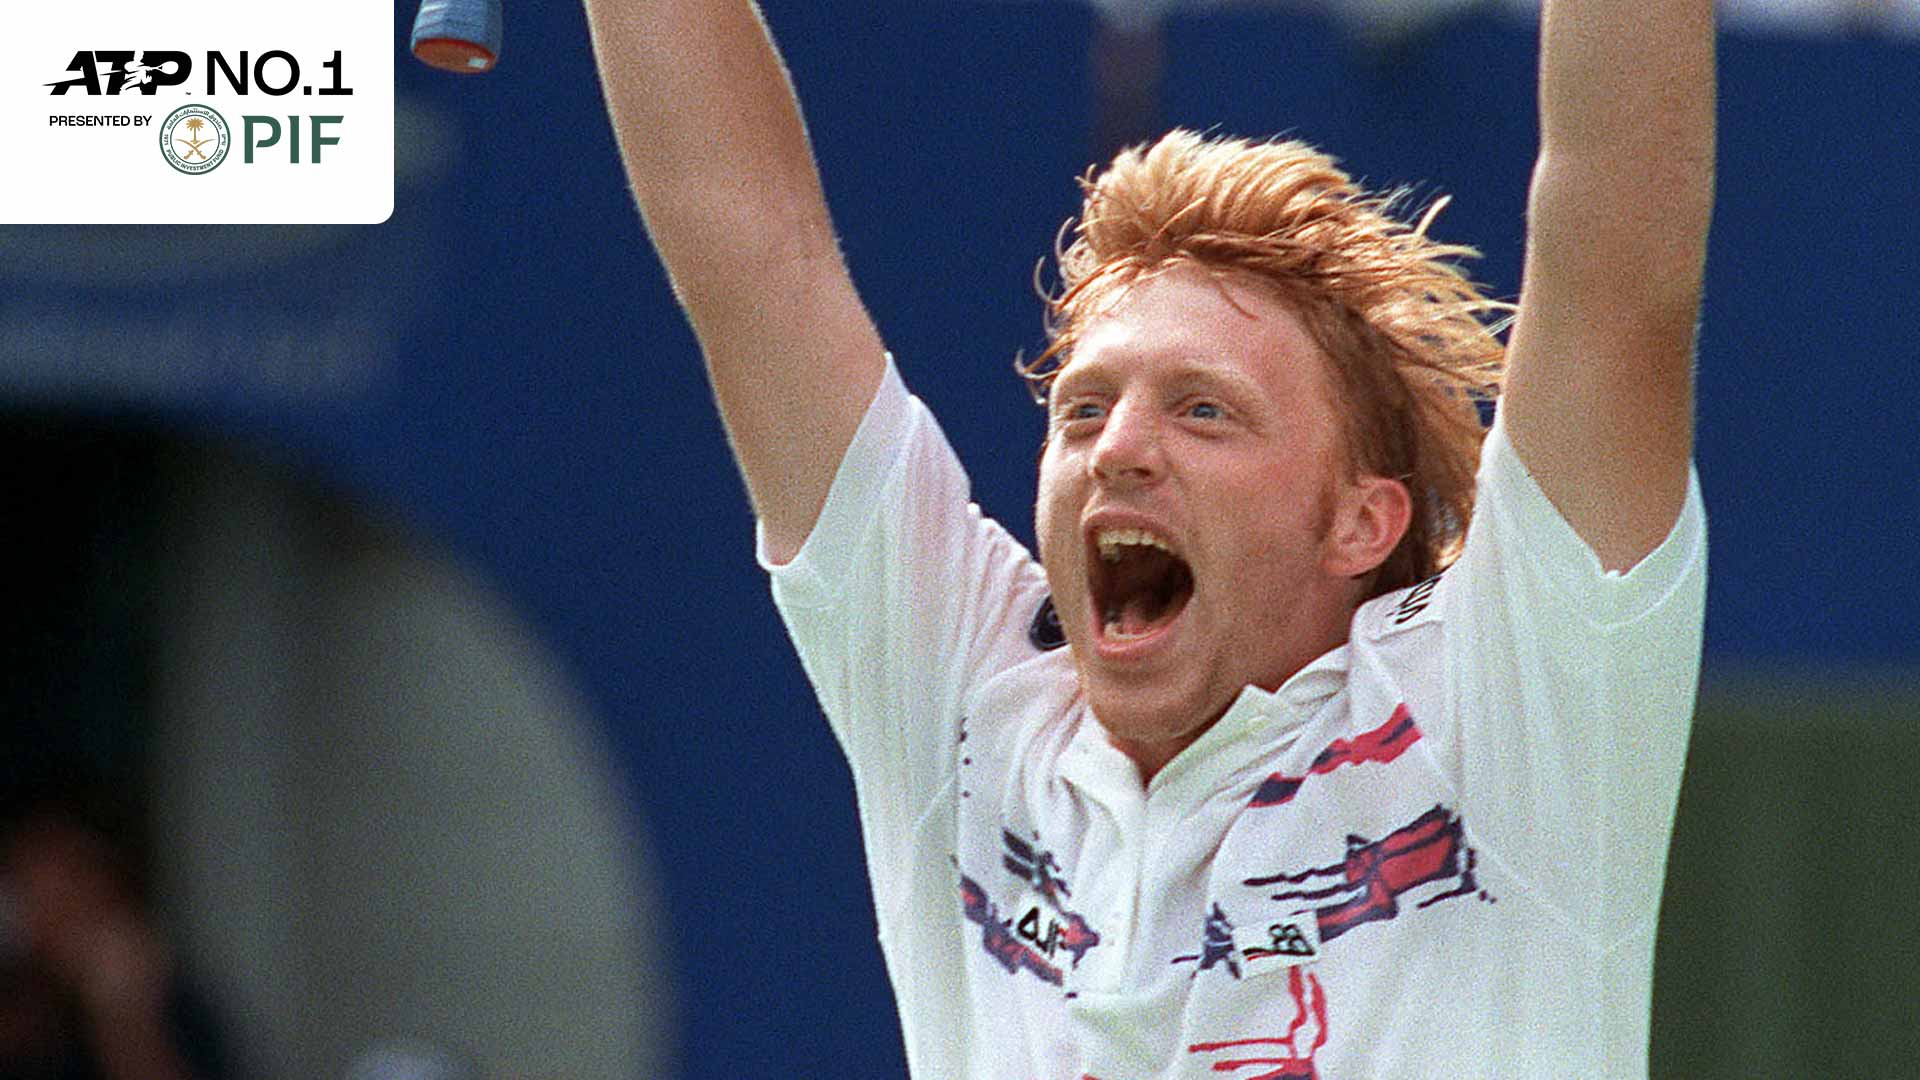 Boris Becker rose to World No. 1 in the PIF ATP Rankings for the first time after winning the 1991 Australian Open.